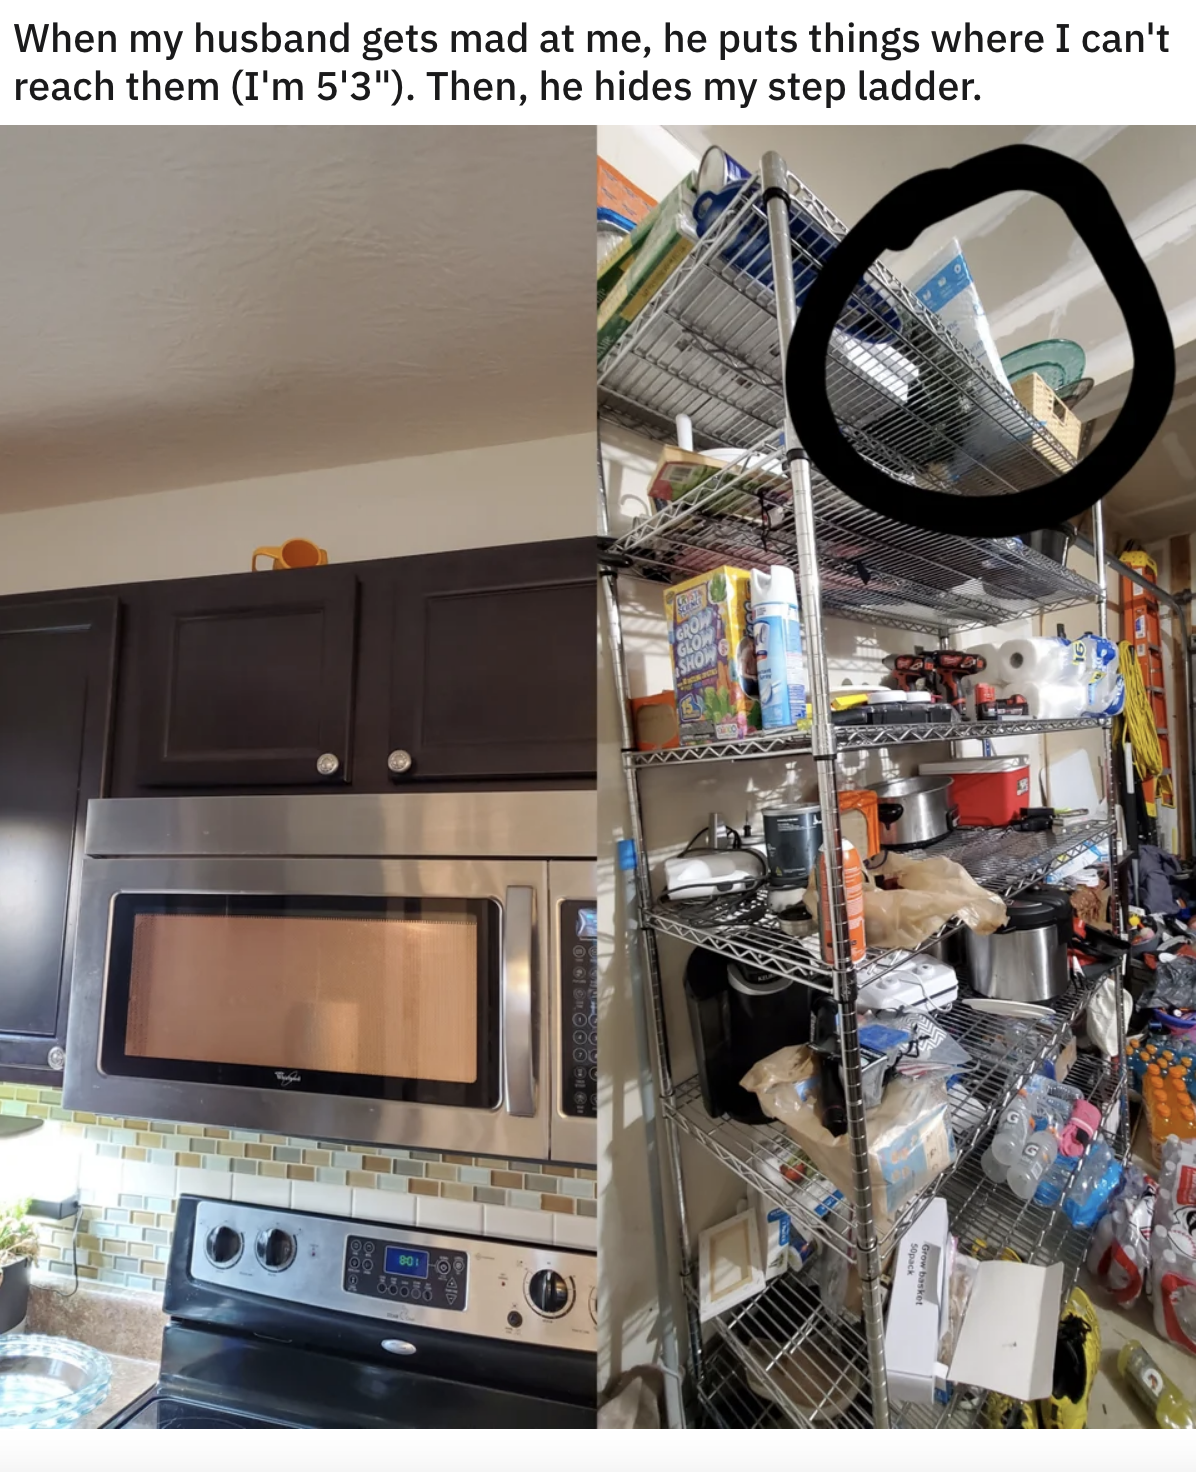 Items placed high up on out-of-reach shelves, with text that says the picture taker&#x27;s husband does this when he&#x27;s mad at them and hides their step ladder